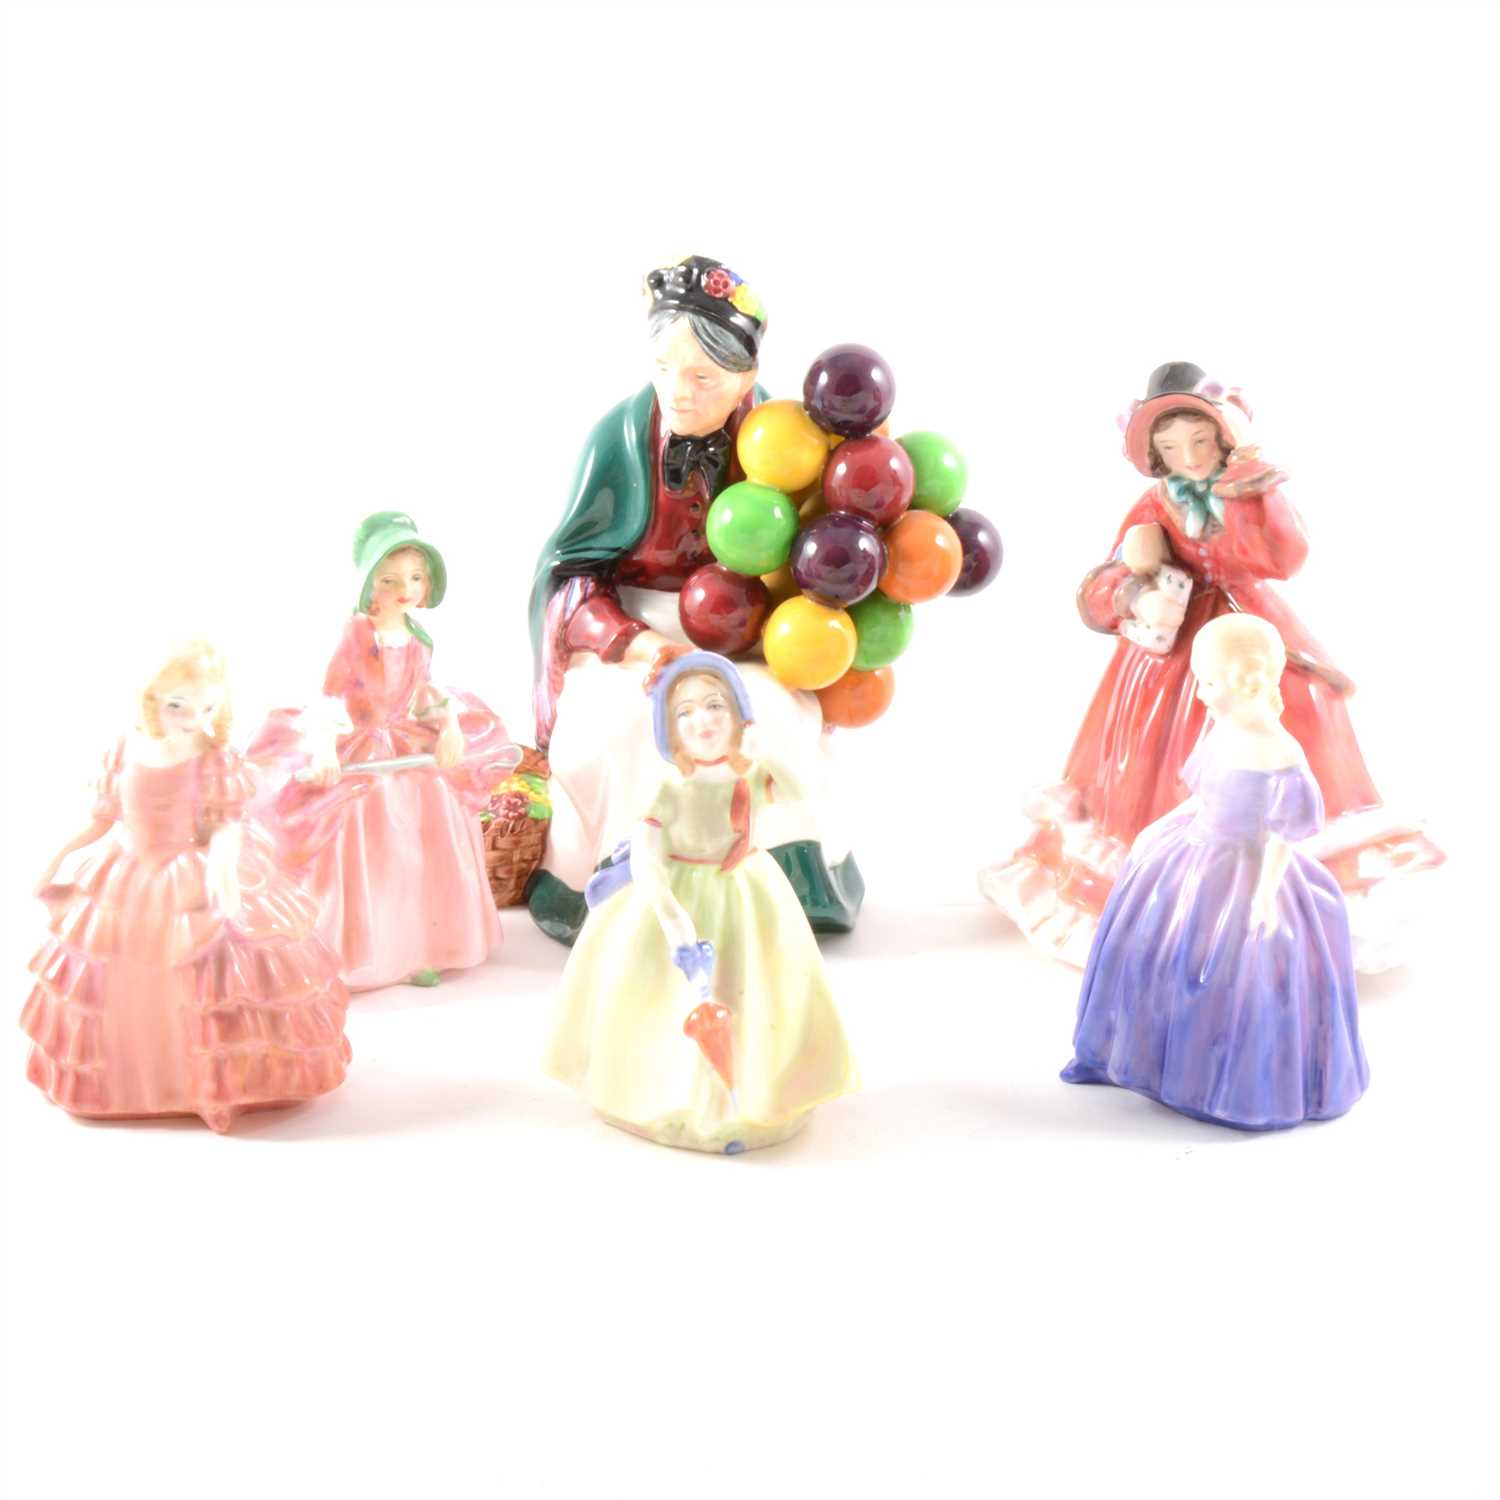 Lot 11 - A Royal Doulton figure, The Old Balloon Seller, HN1315, and five other Doulton fgures